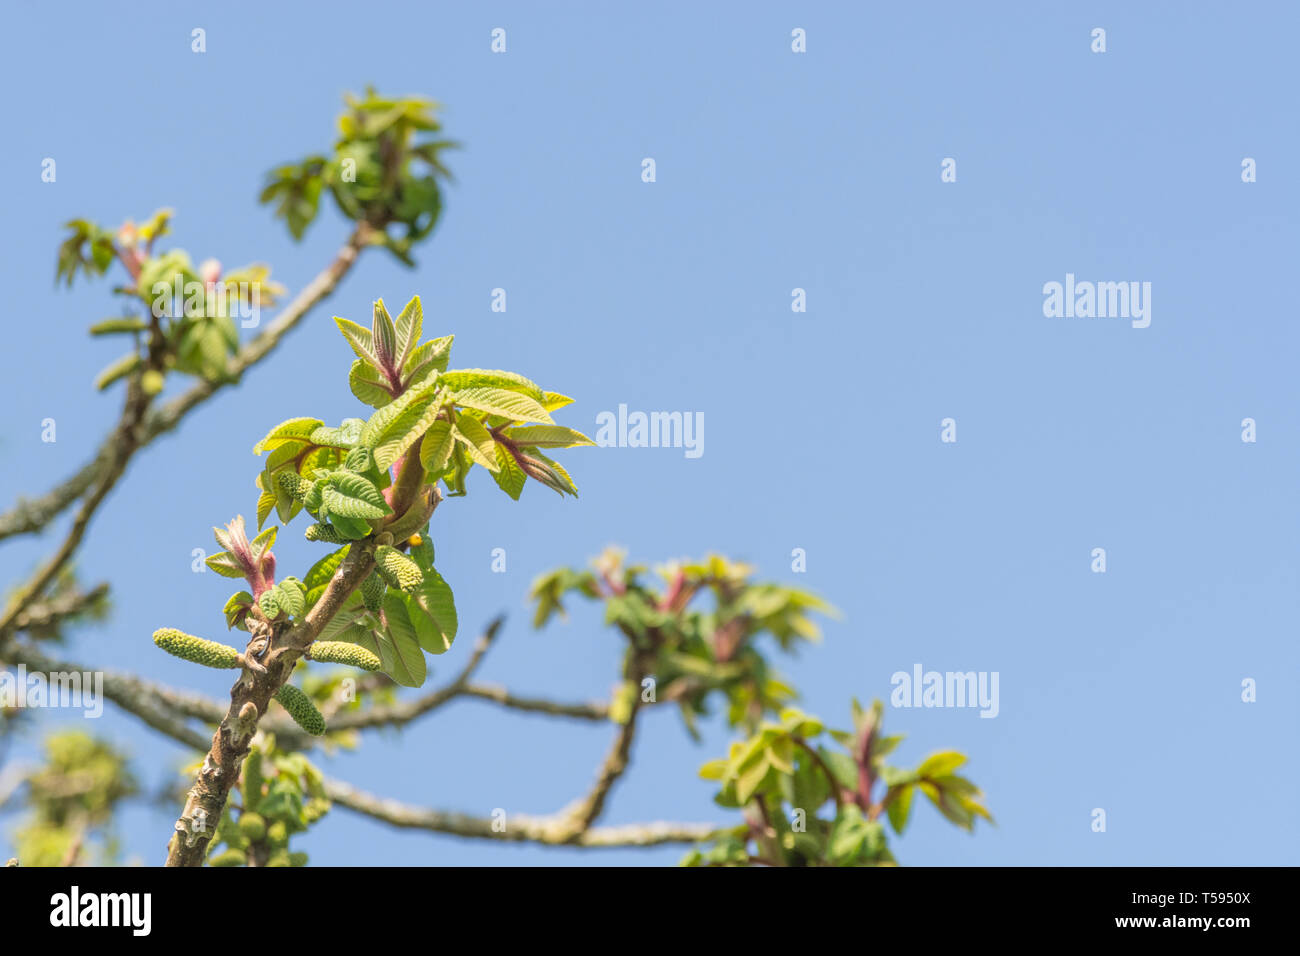 Springtime leaves of Japanese Walnut tree / Juglans ailantifolia. Parts used in herbal remedies / for medicinal uses. Stock Photo